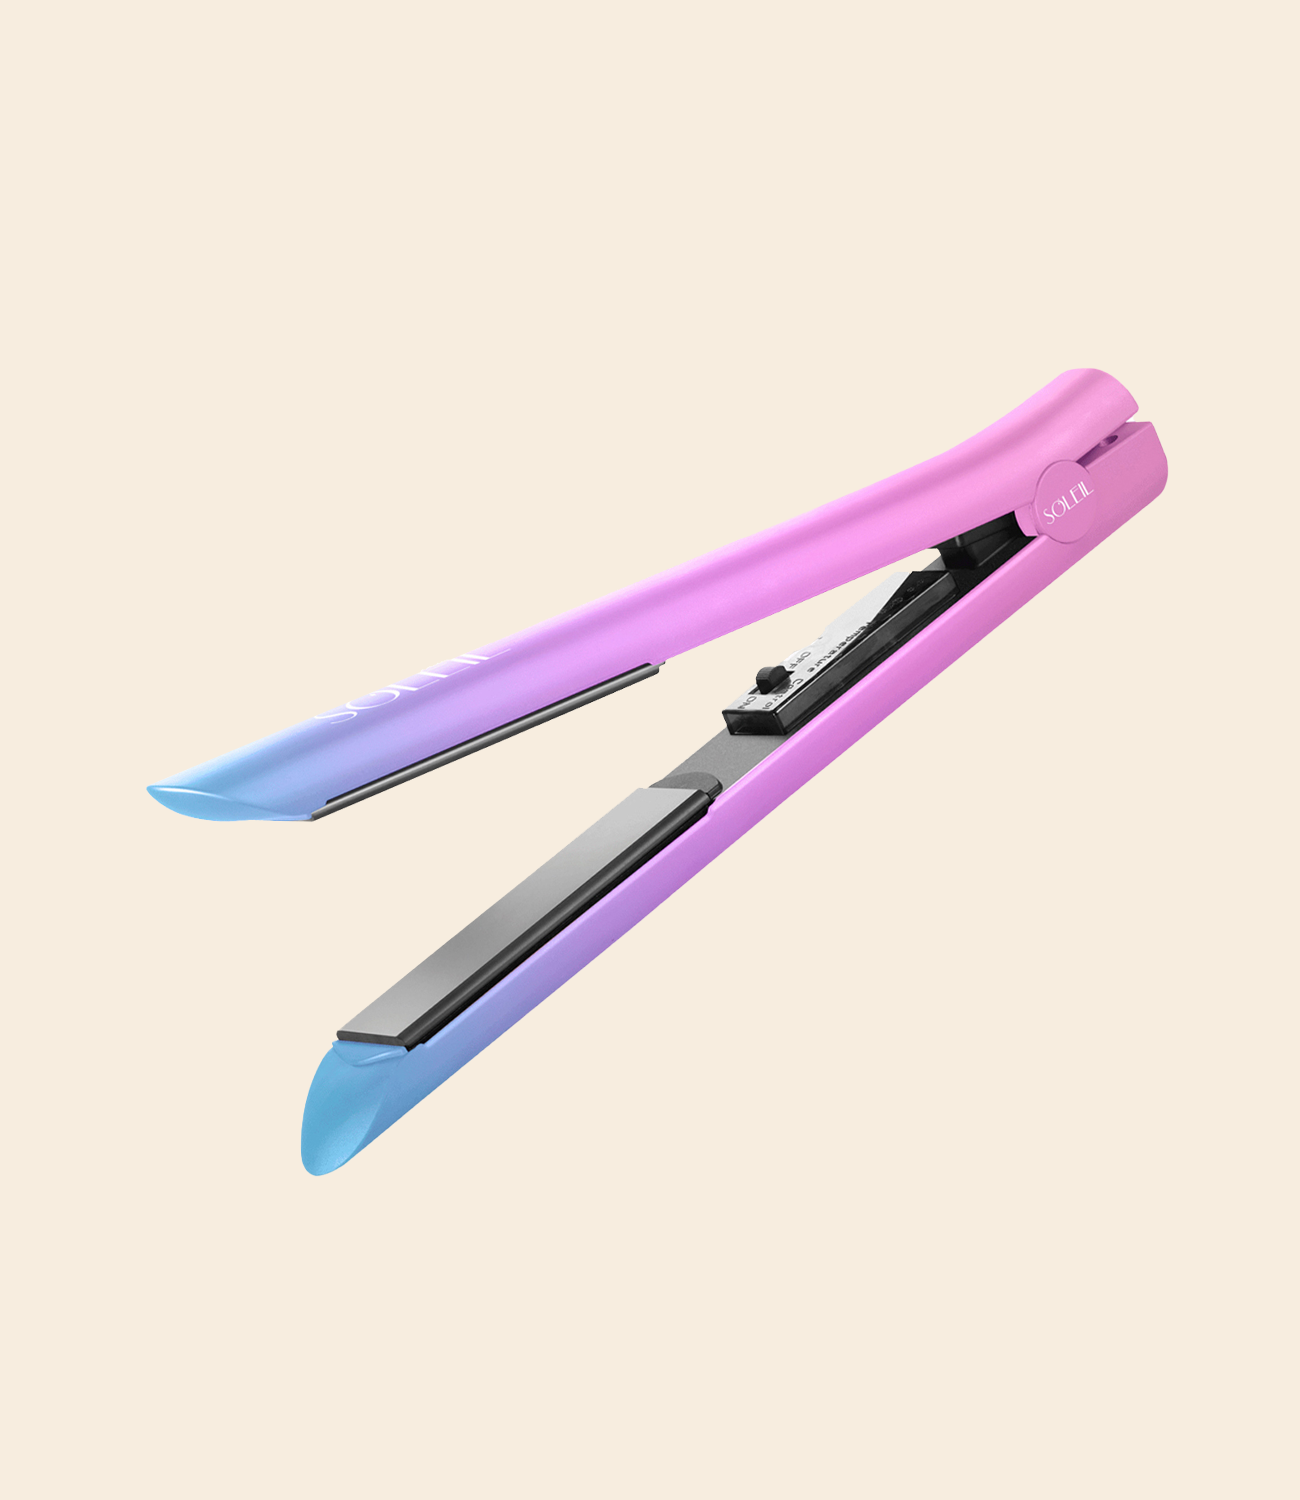 Soleil flat iron with gradient blue to pink color, black solid ceramic plates and on/off button. Set against a beige background